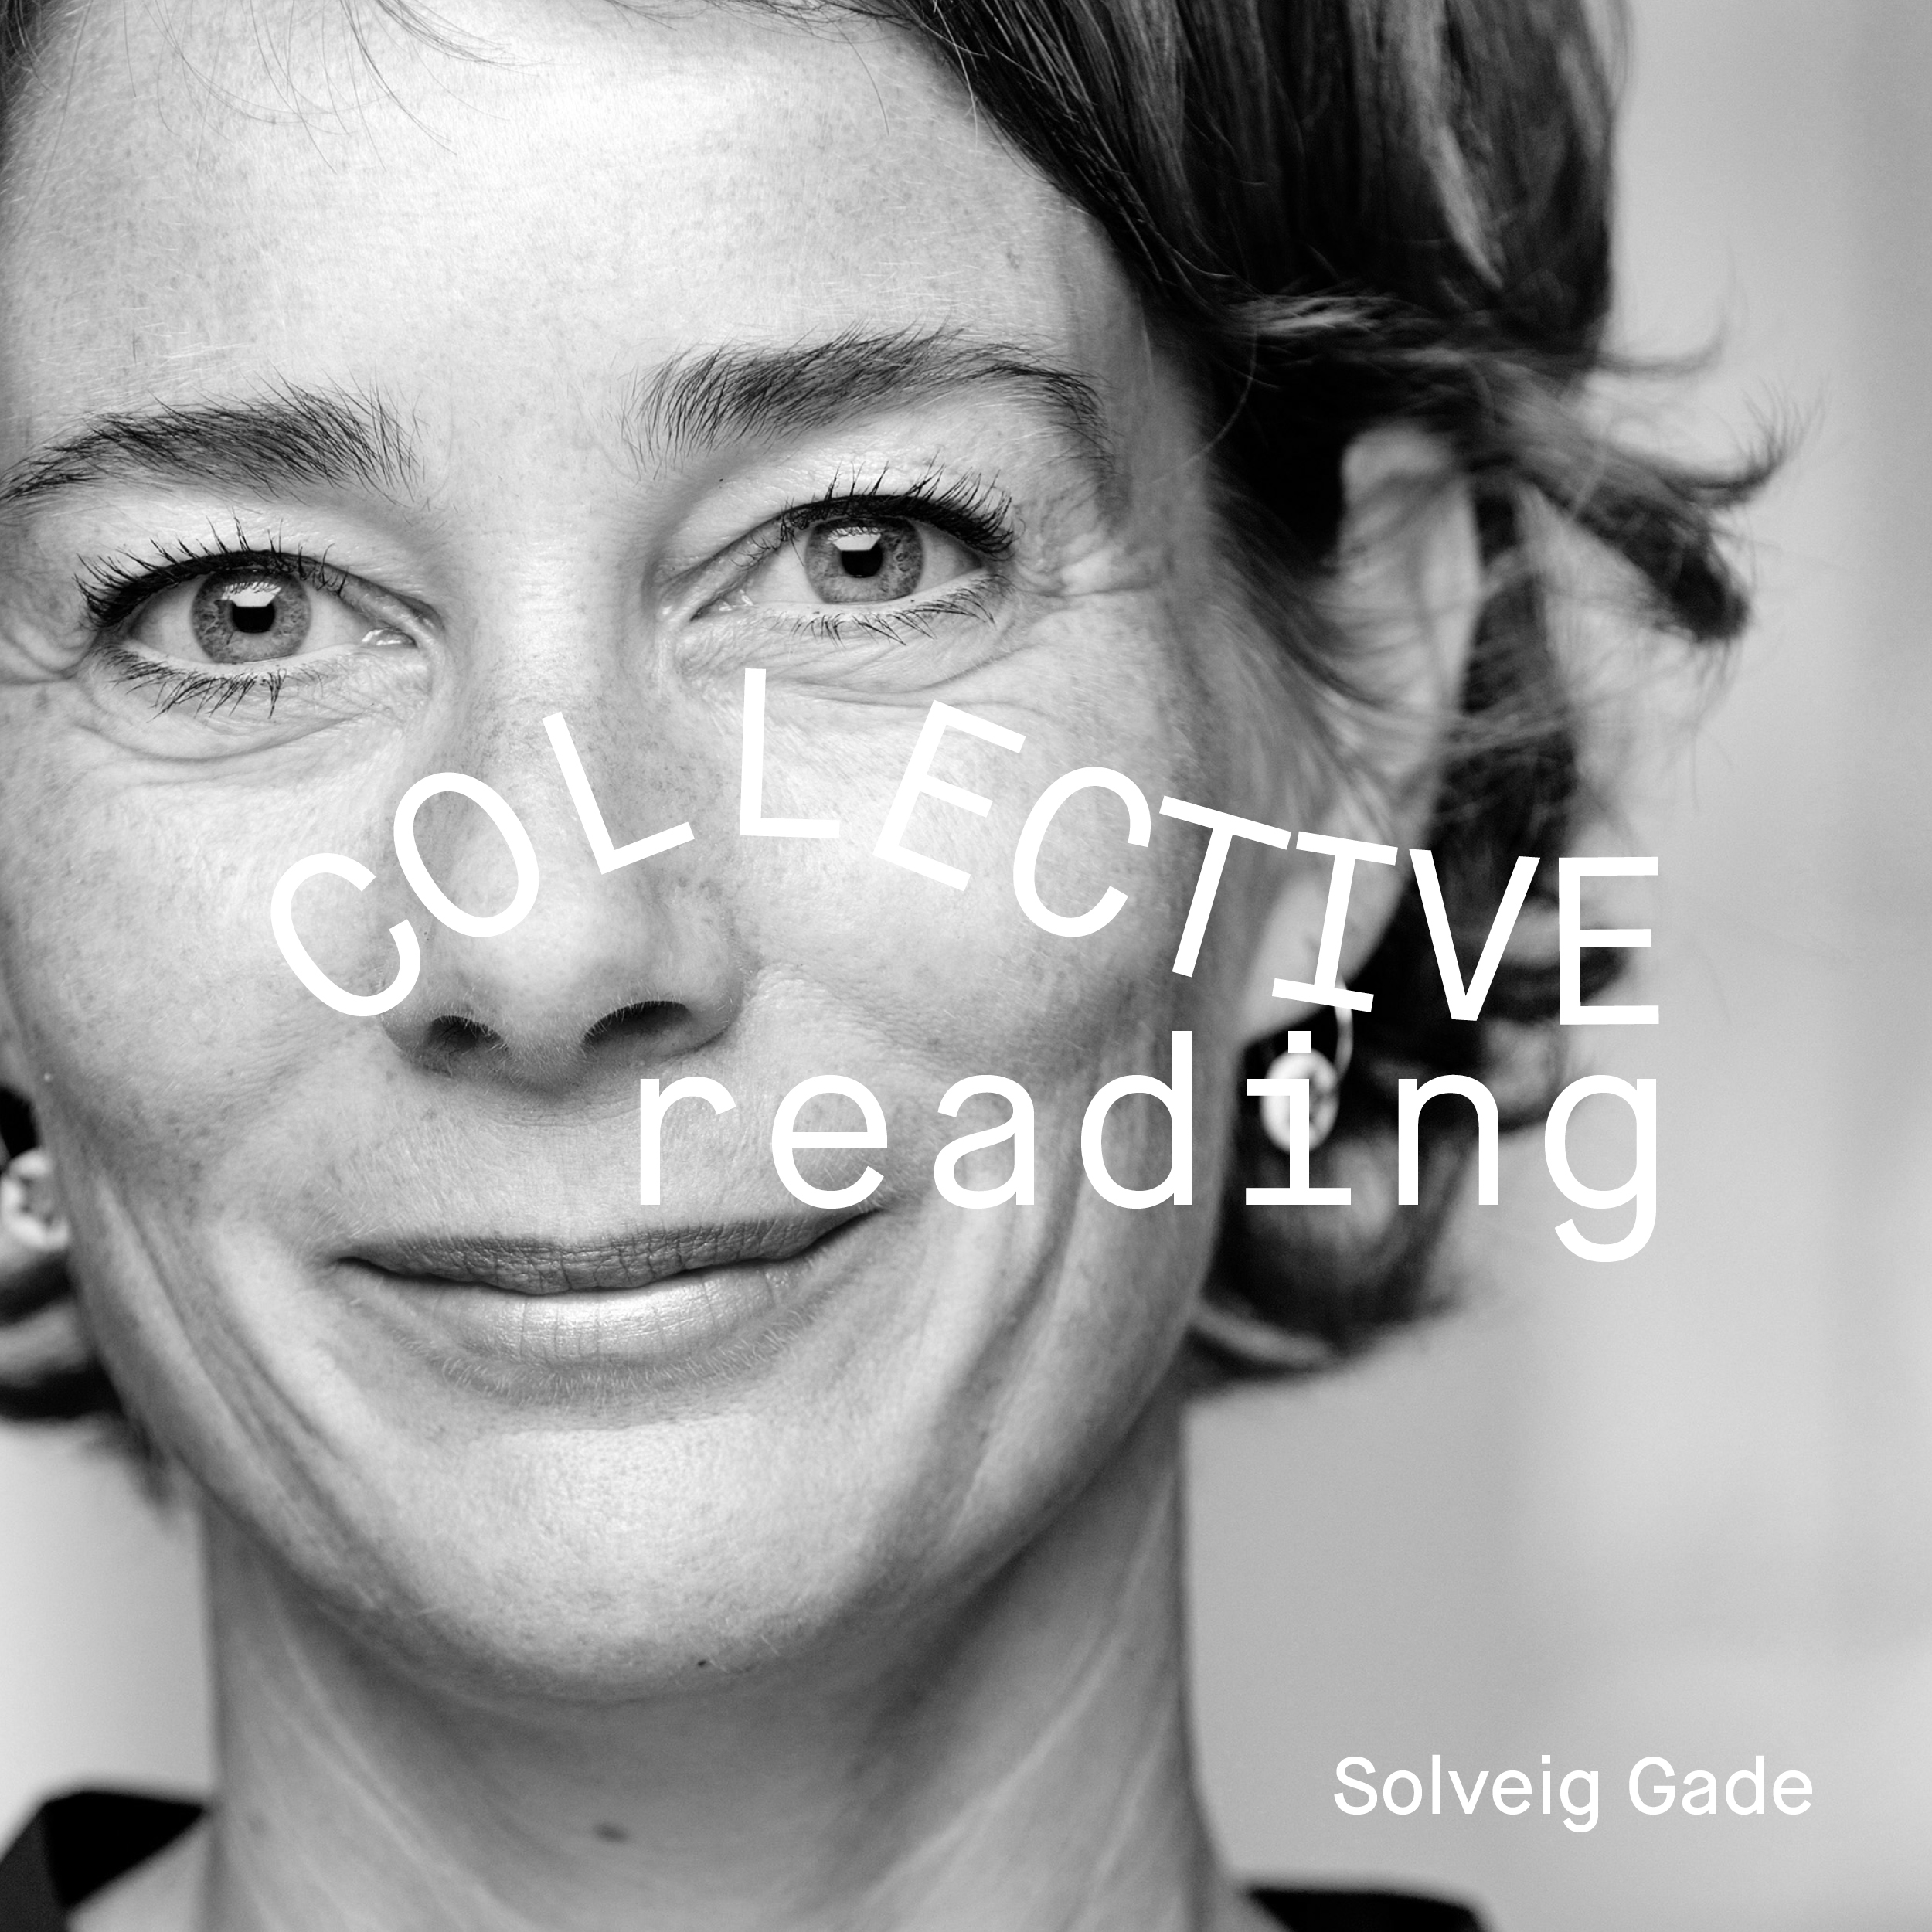 COLLECTIVE READING with Solveig Gade